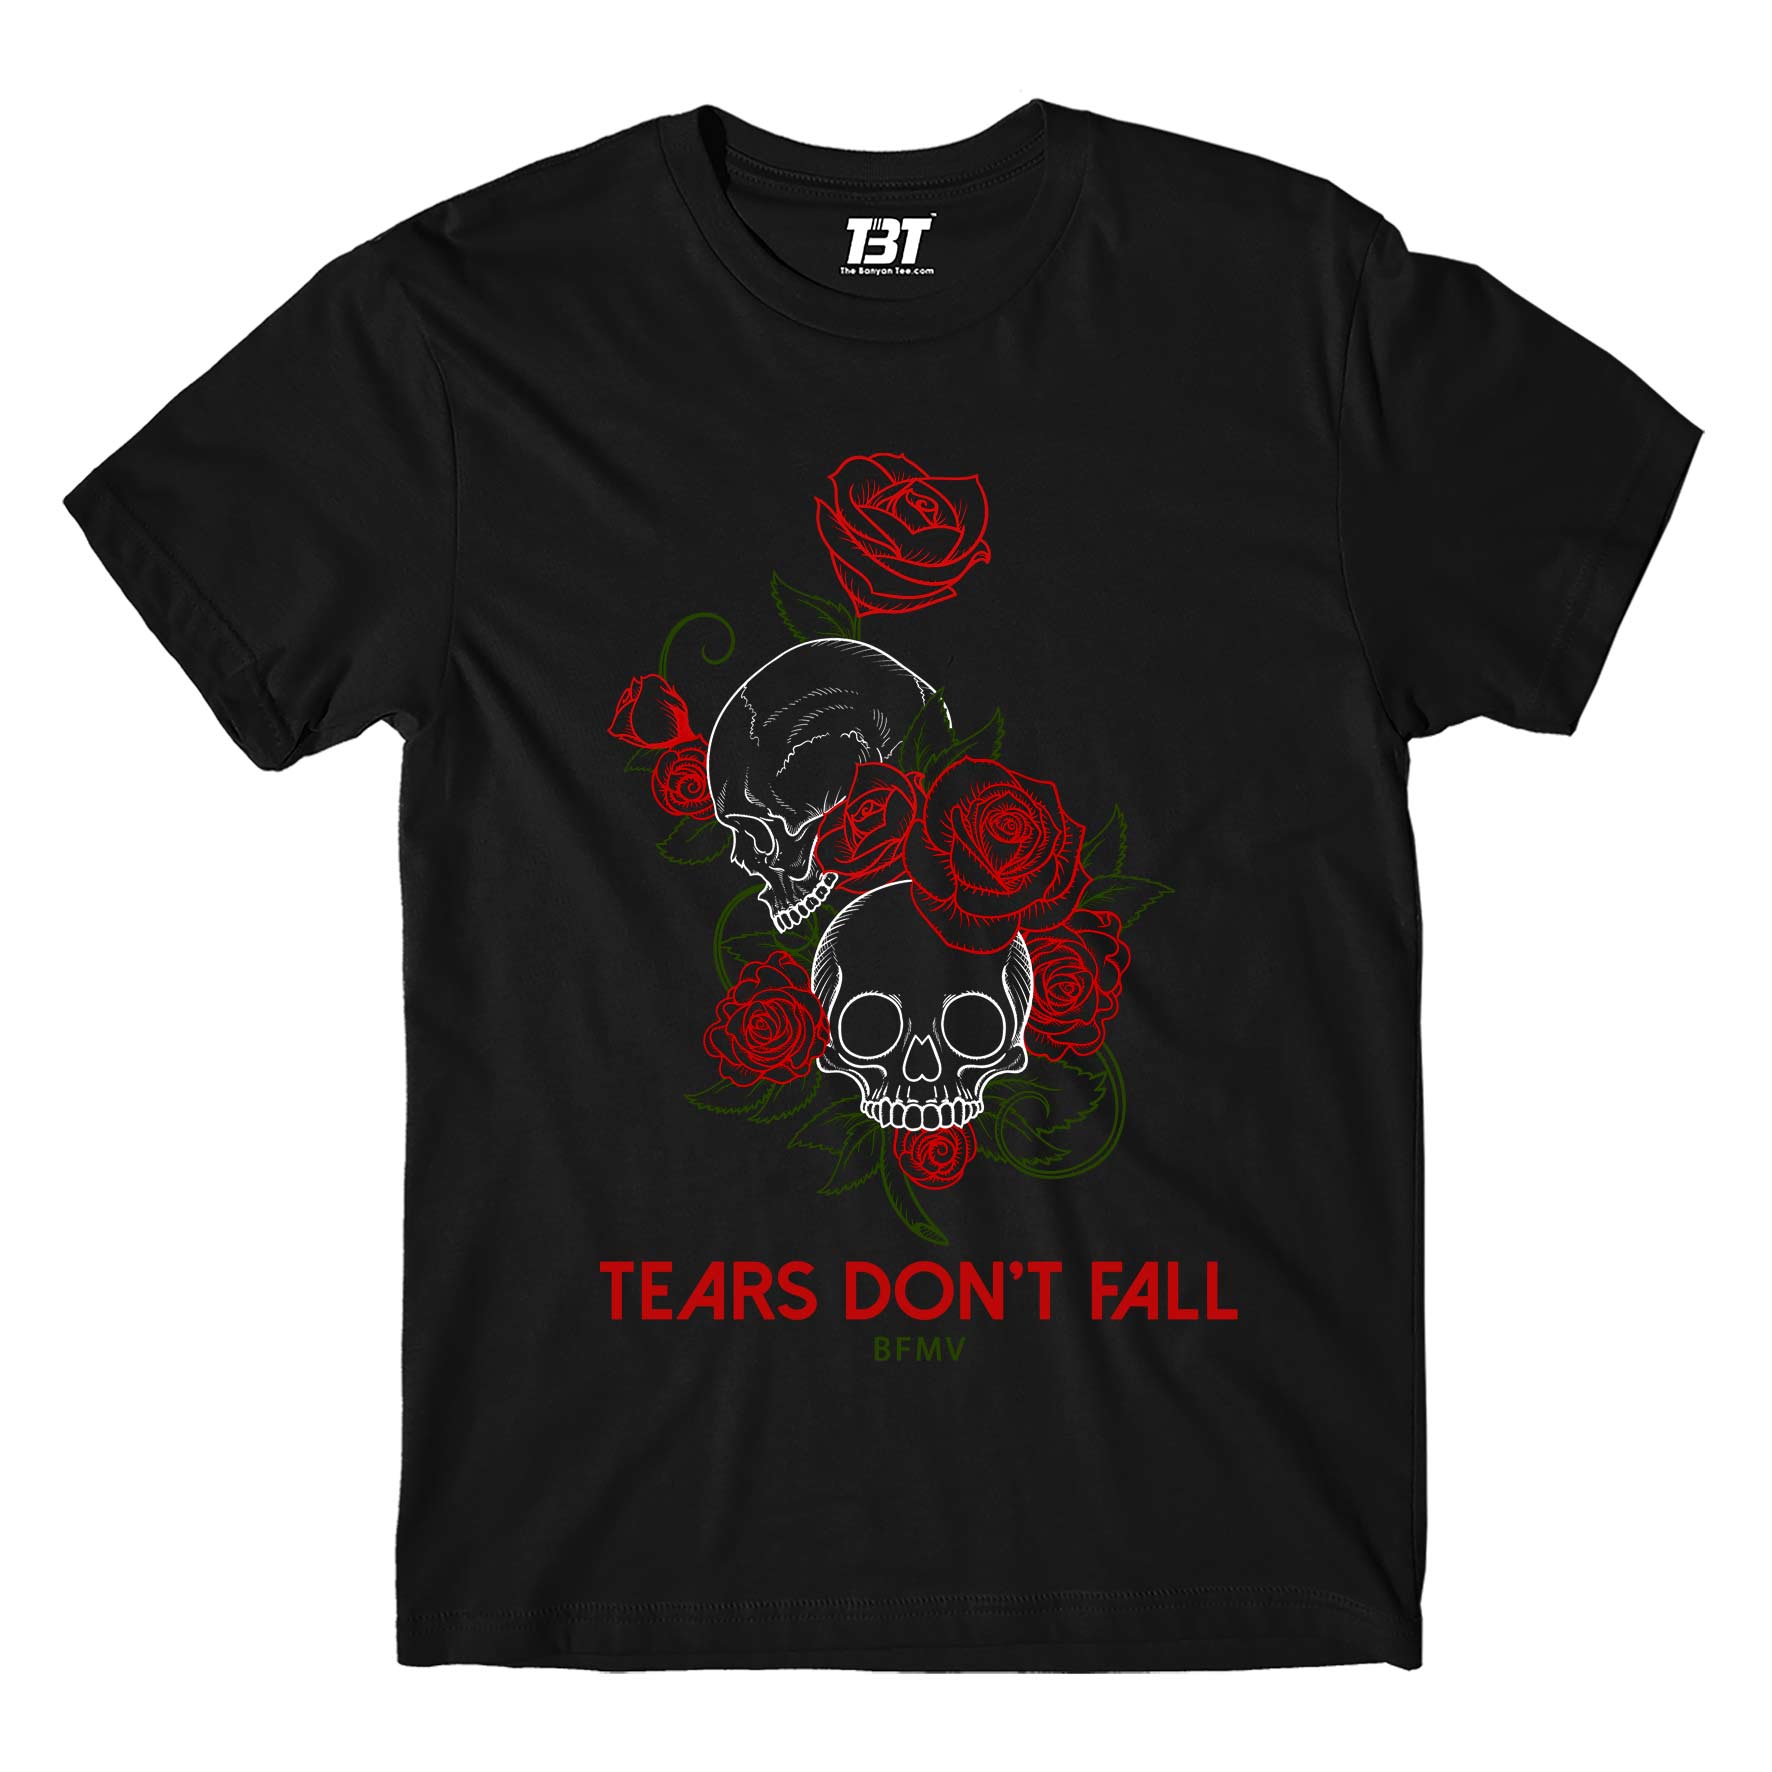 bullet for my valentine tears don't fall t-shirt music band buy online usa united states the banyan tee tbt men women girls boys unisex black